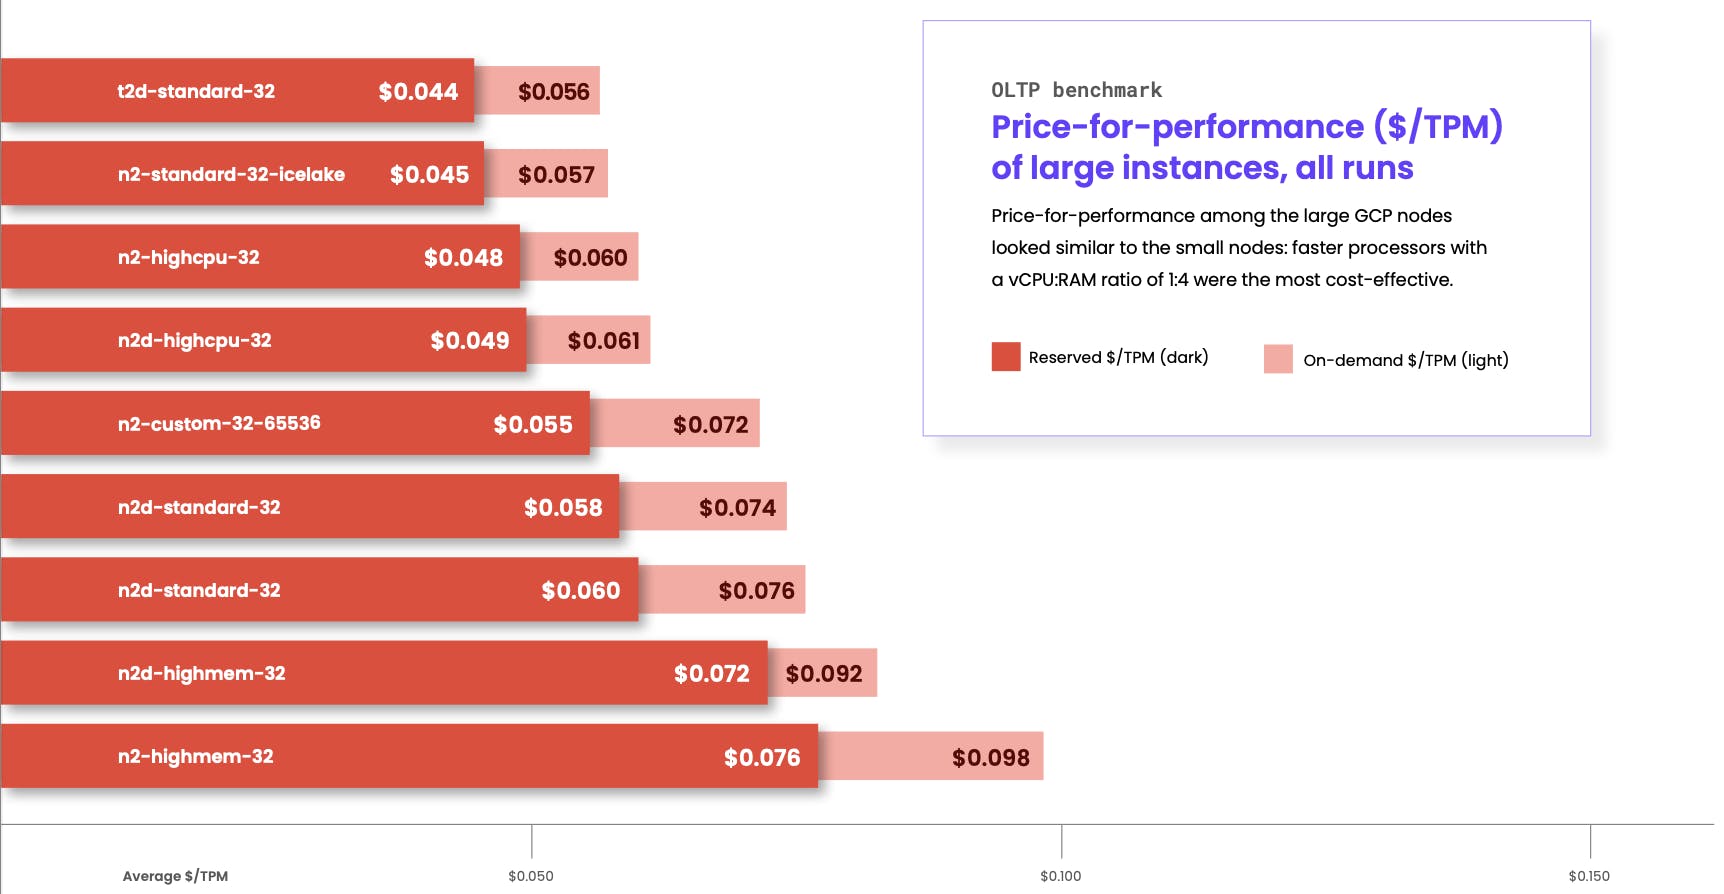 gcp instance type price for performance, large instances